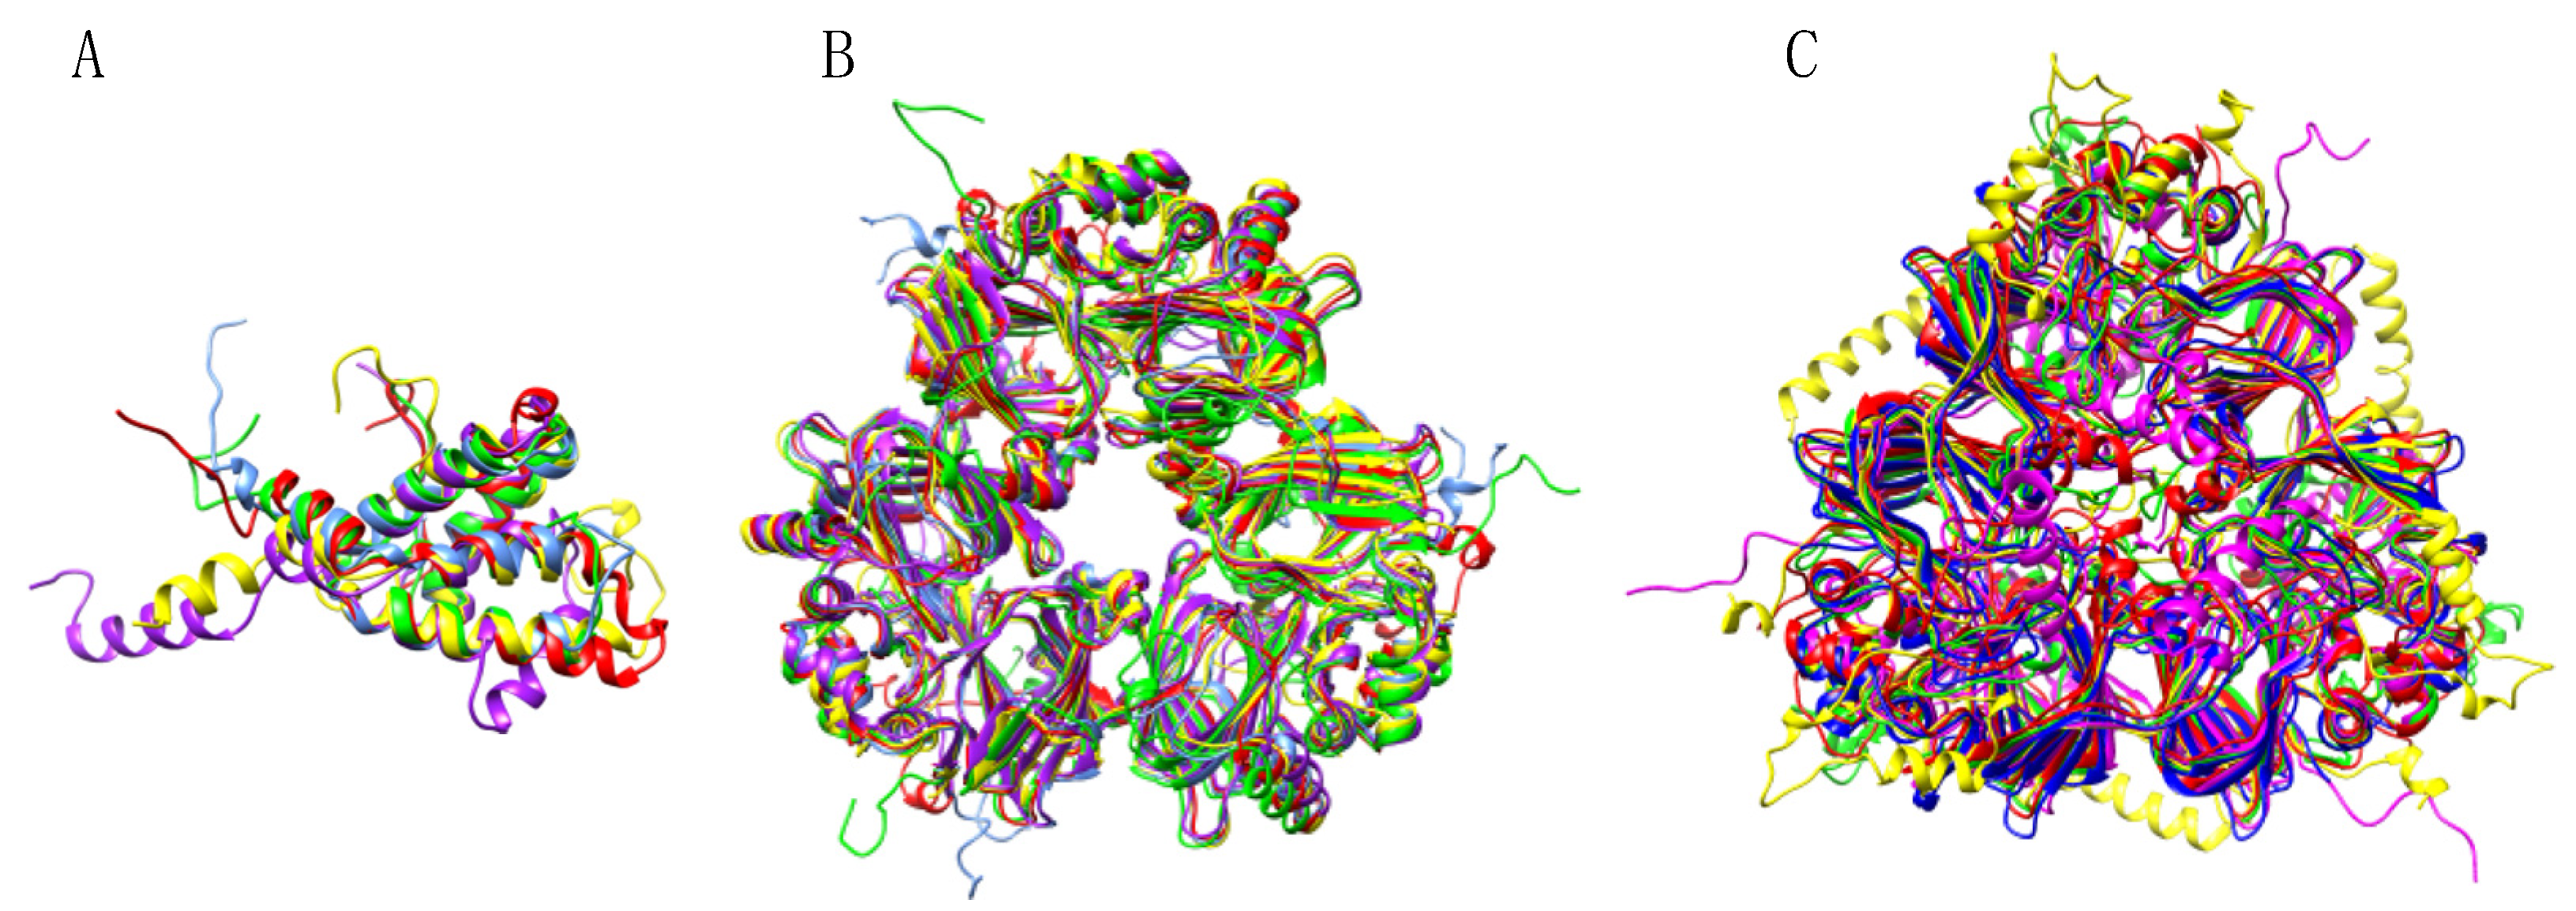 Allergies | Free Full-Text | IgE-Binding Epitopes of Pis v 1, Pis v 2 and  Pis v 3, the Pistachio (Pistacia vera) Seed Allergens | HTML